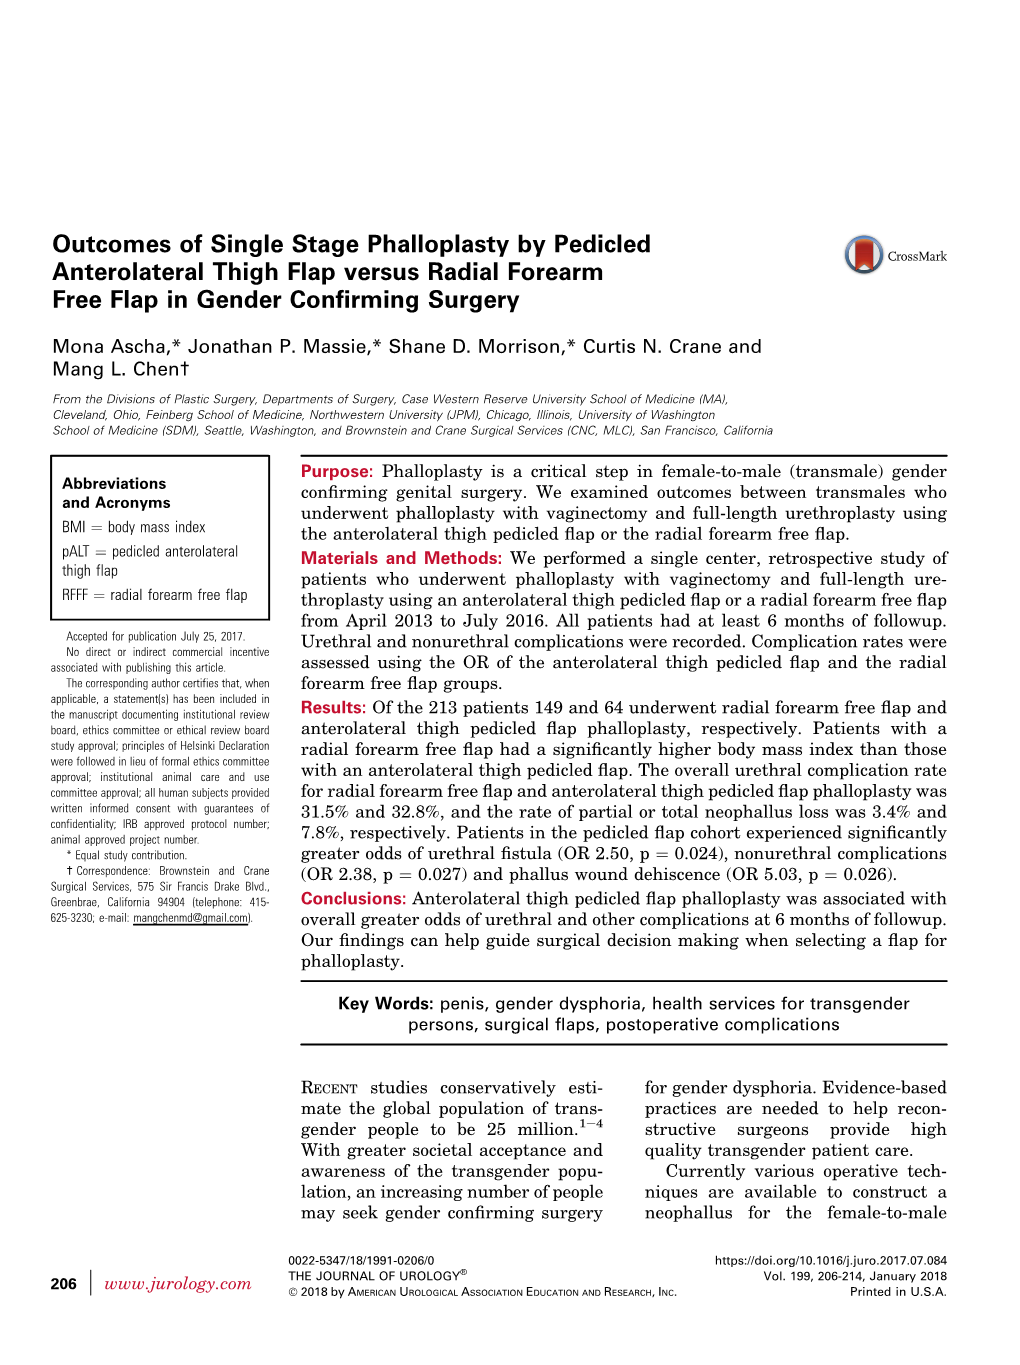 Outcomes of Single Stage Phalloplasty by Pedicled Anterolateral Thigh Flap Versus Radial Forearm Free Flap in Gender Conﬁrming Surgery